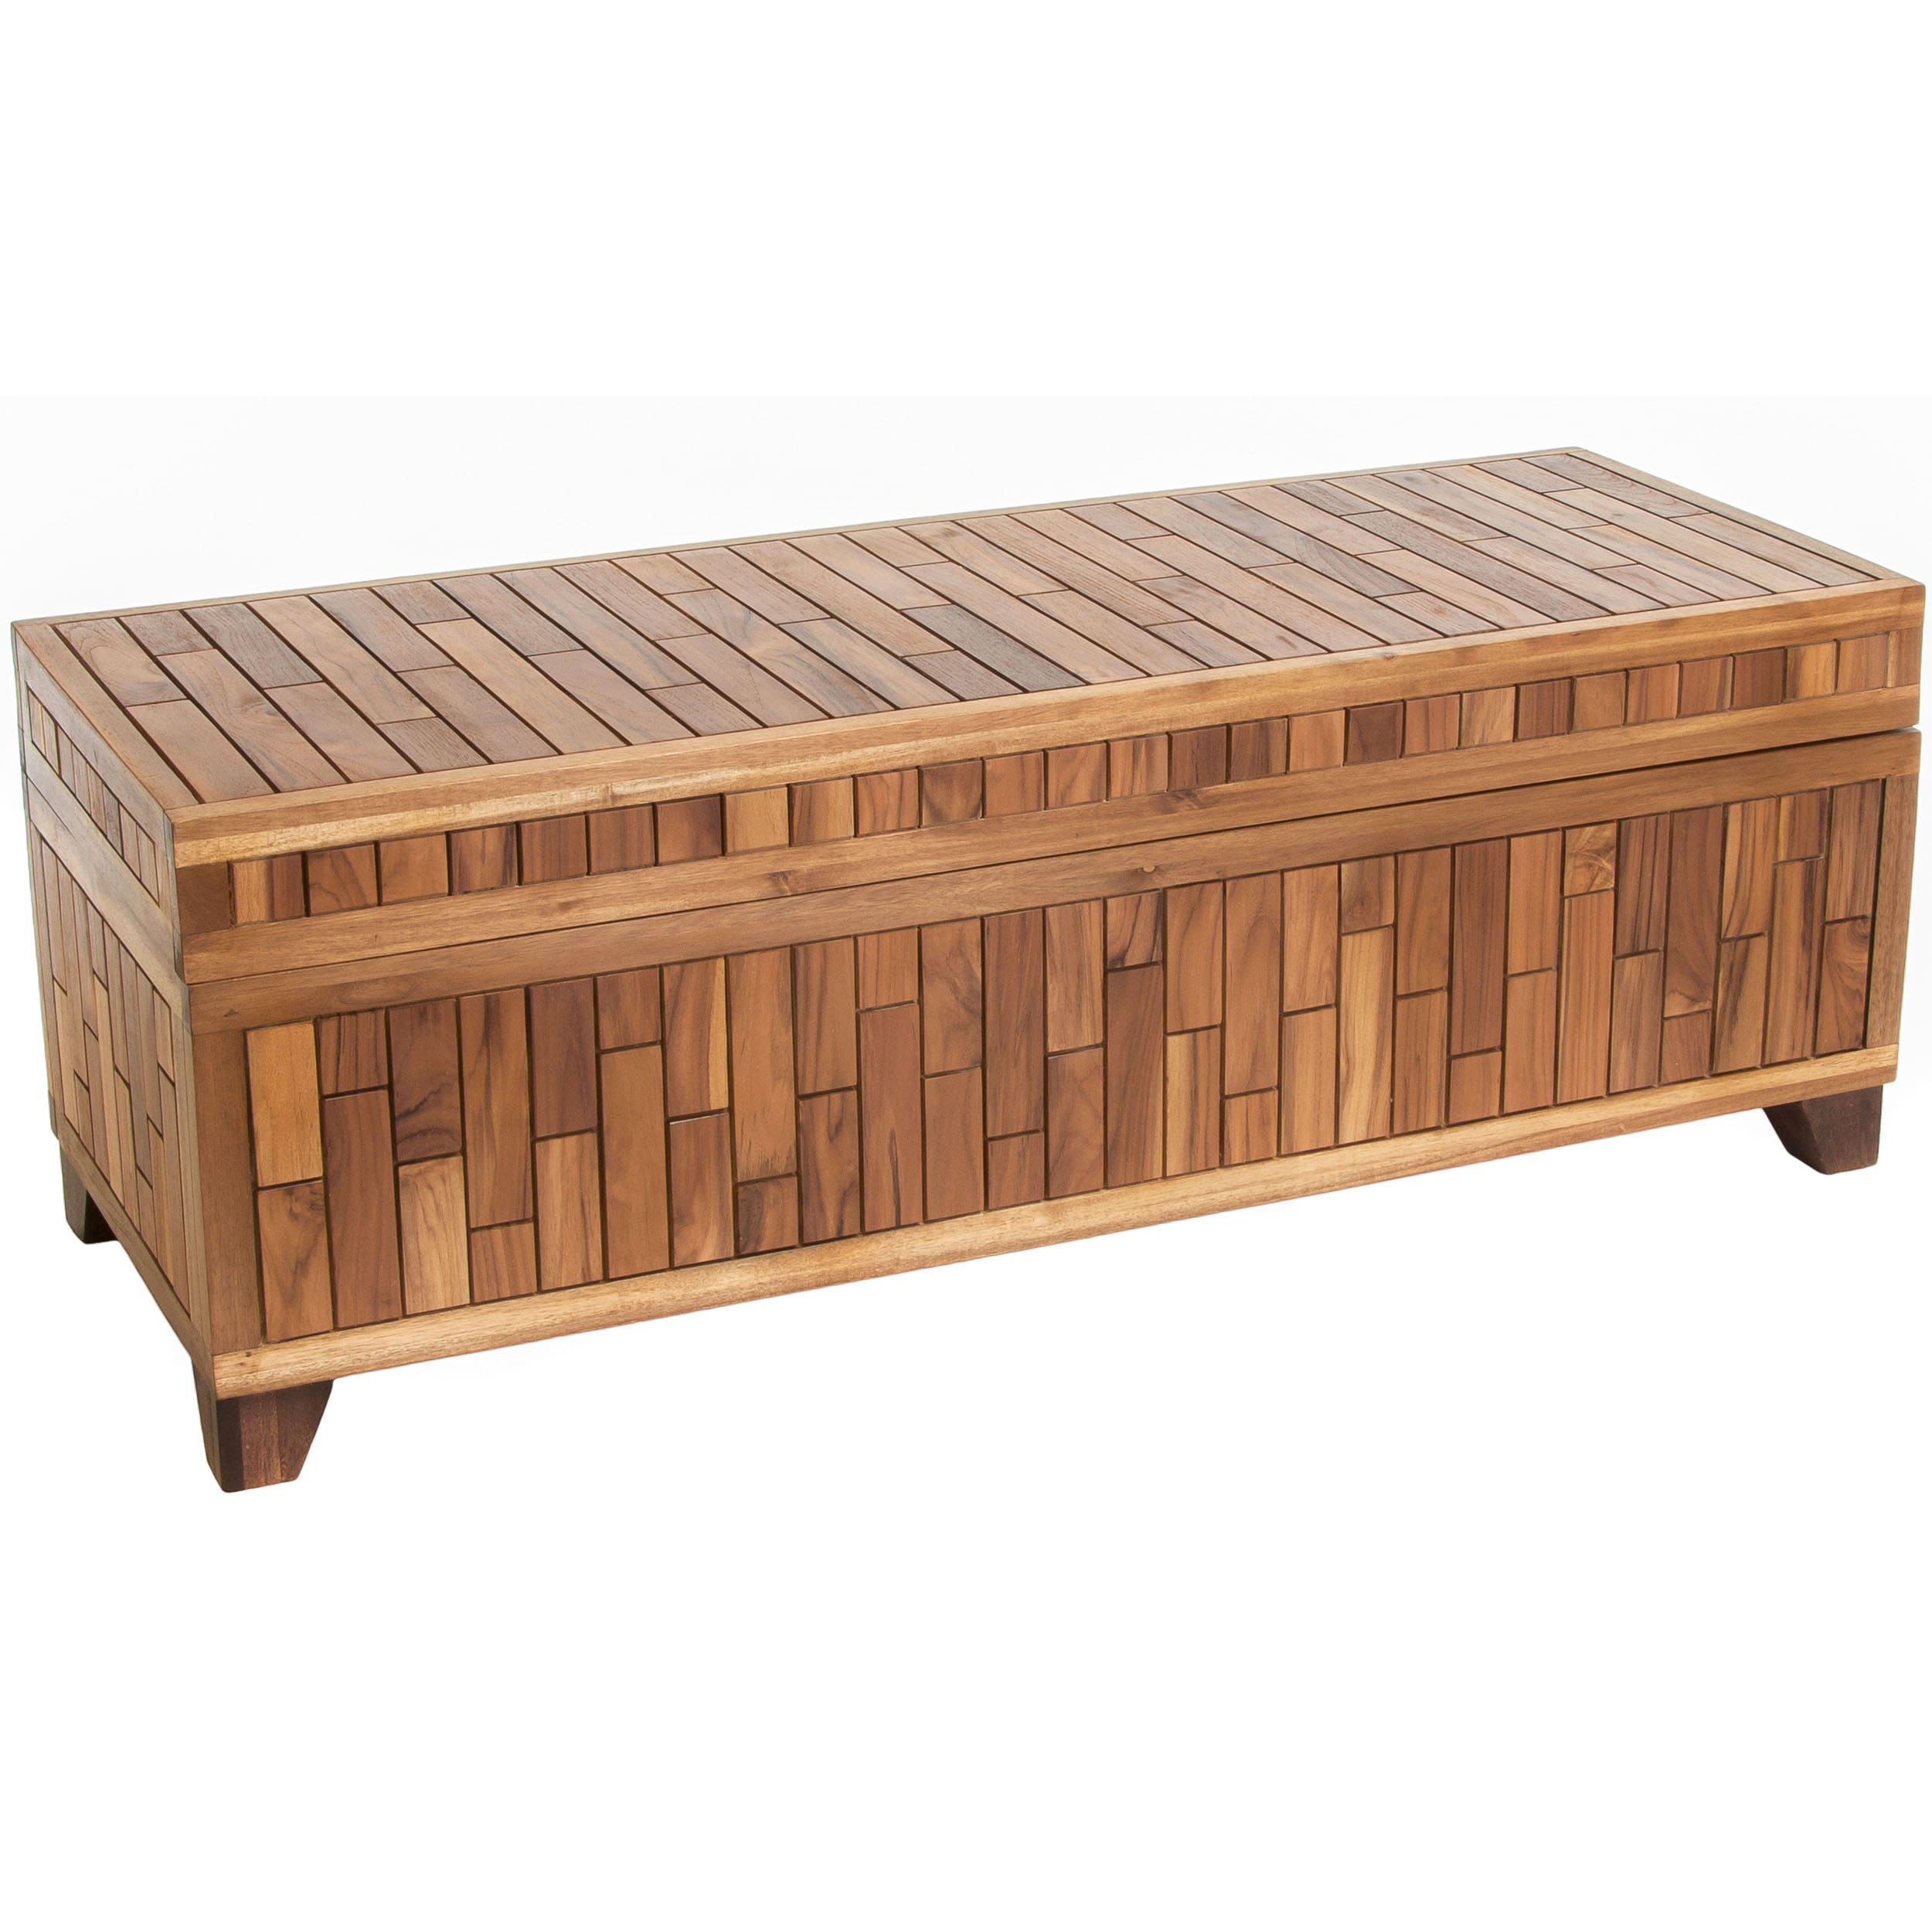 Christopher Knight Home Luca Wood Storage Ottoman Bench Today $199.99